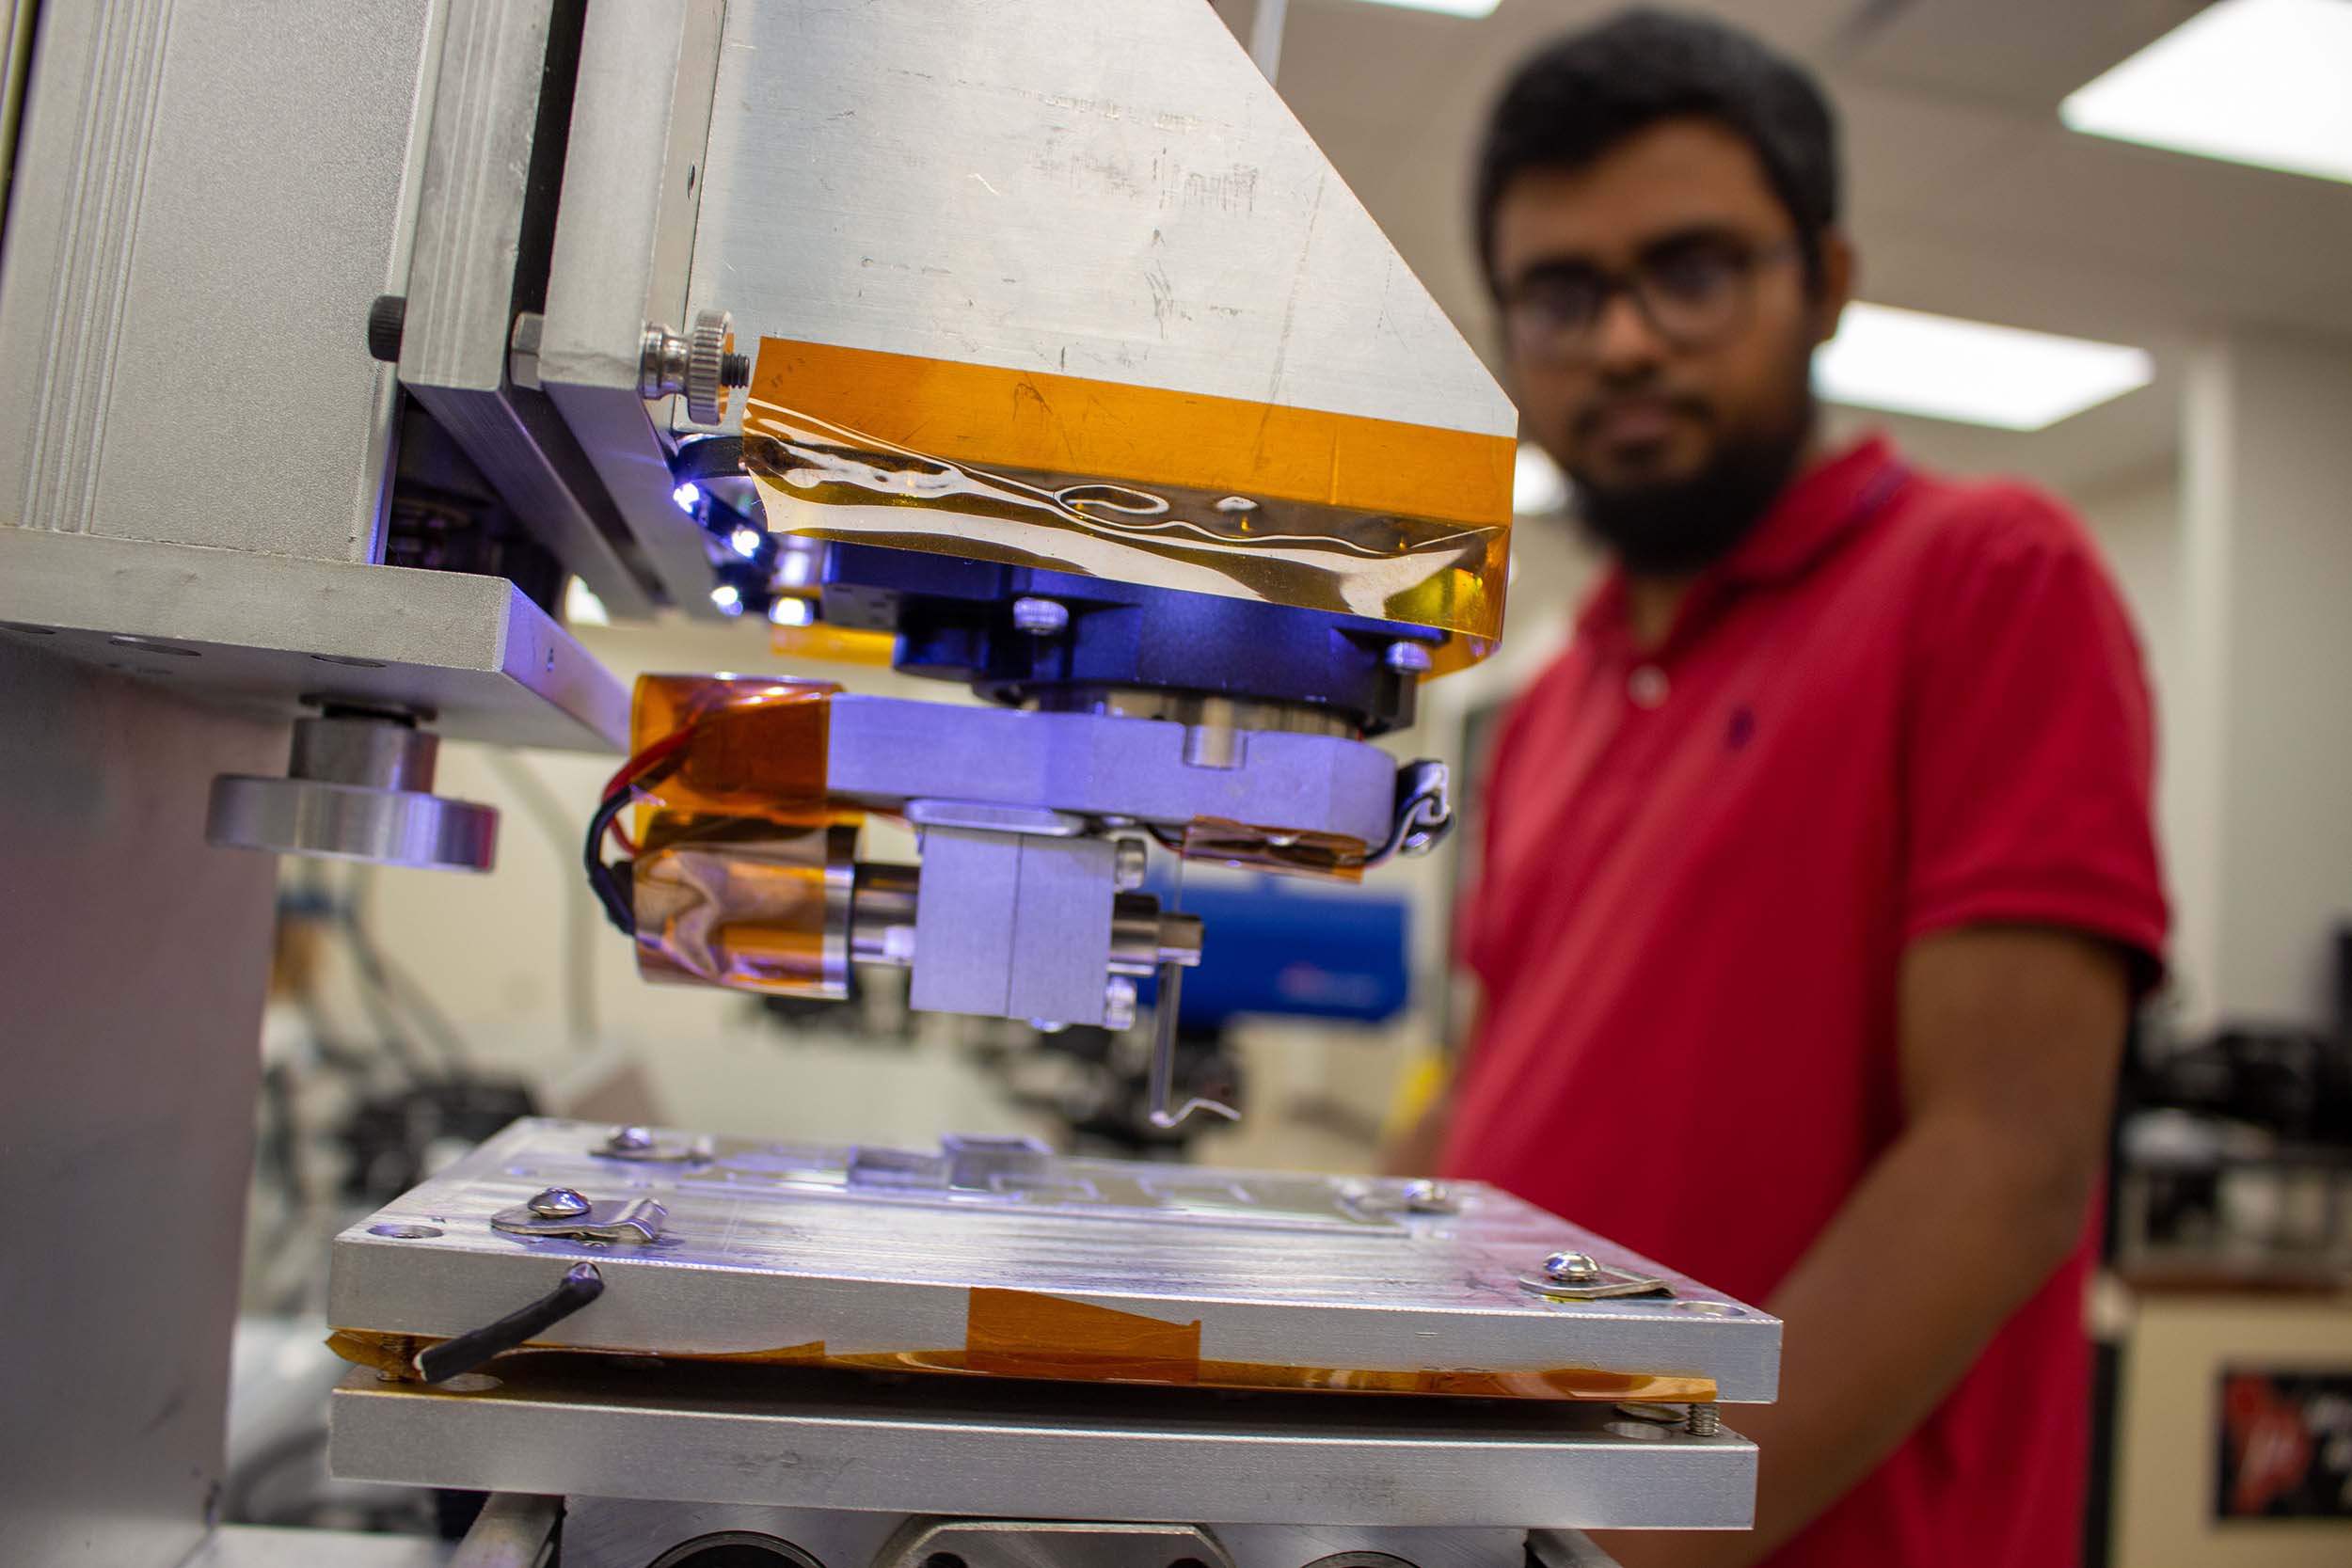 A man in an engineering lab looks on as an advanced 3D printer begins building an object